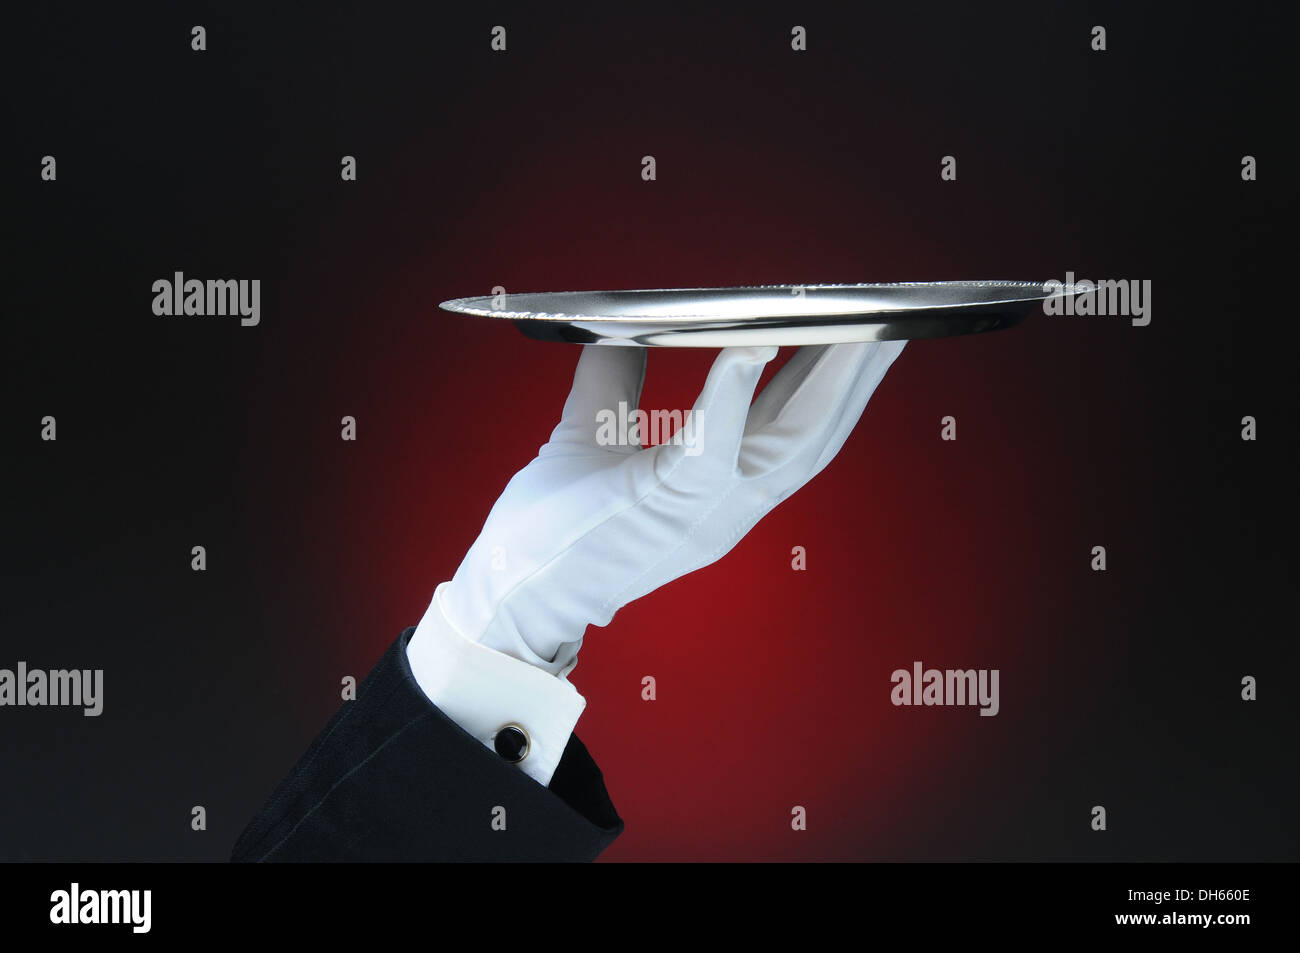 Closeup of a waiter's hand holding a silver serving tray in his fingertips over a light ot dark red background. Stock Photo